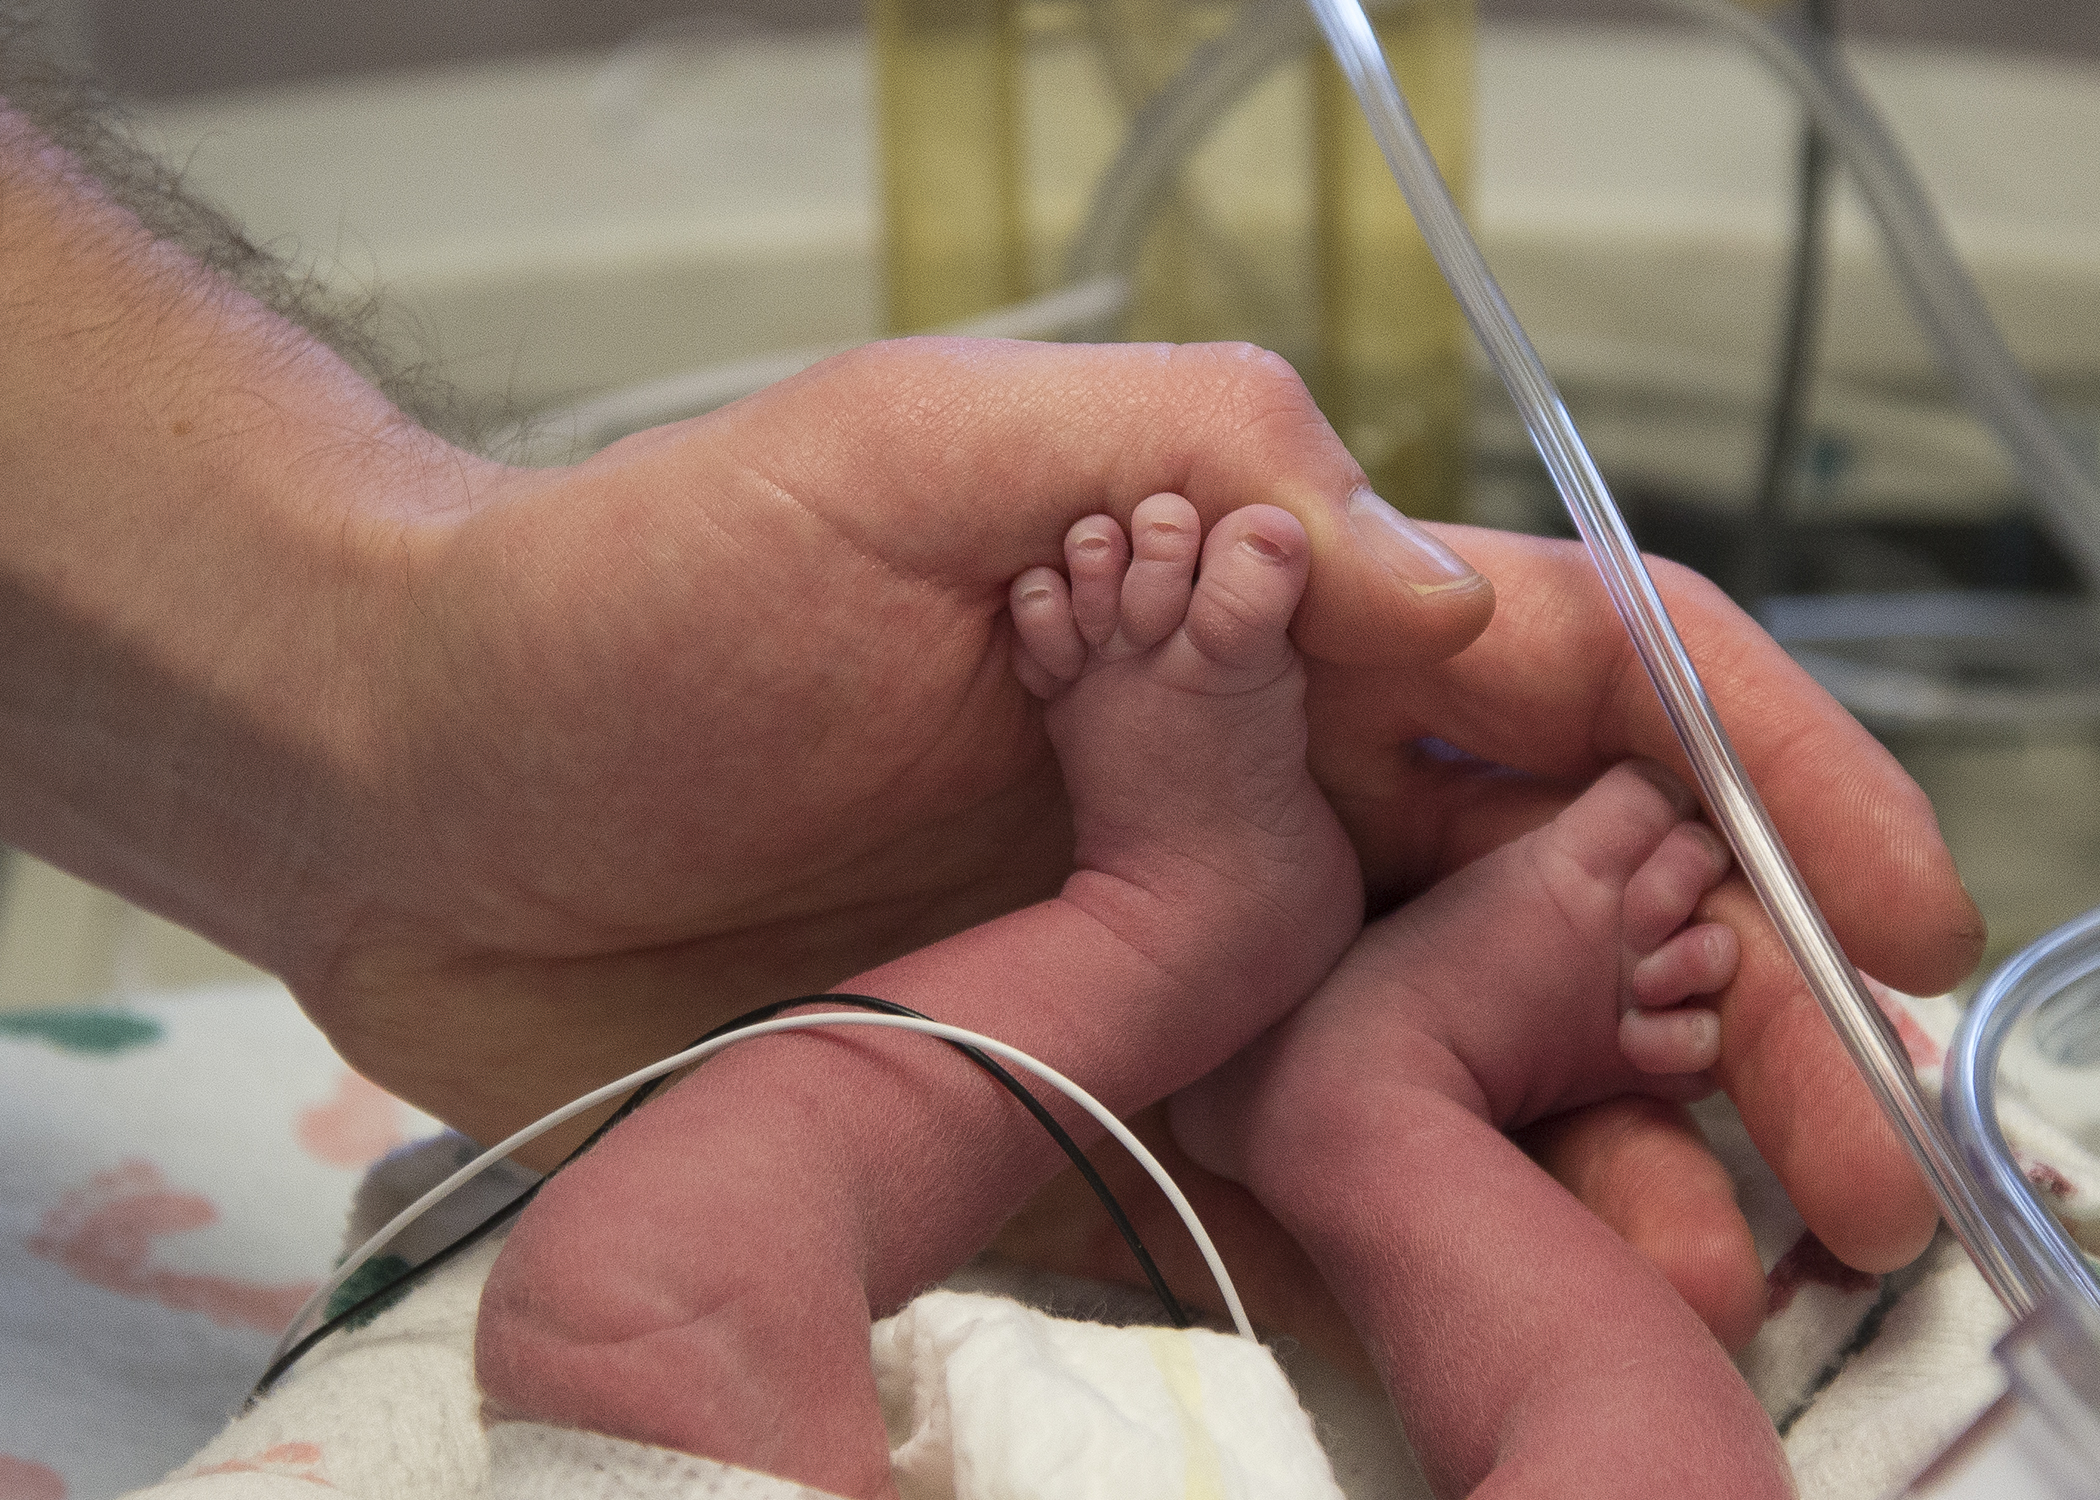 The baby's feet in the father's hands. (Baylor University Medical Center at Dallas)